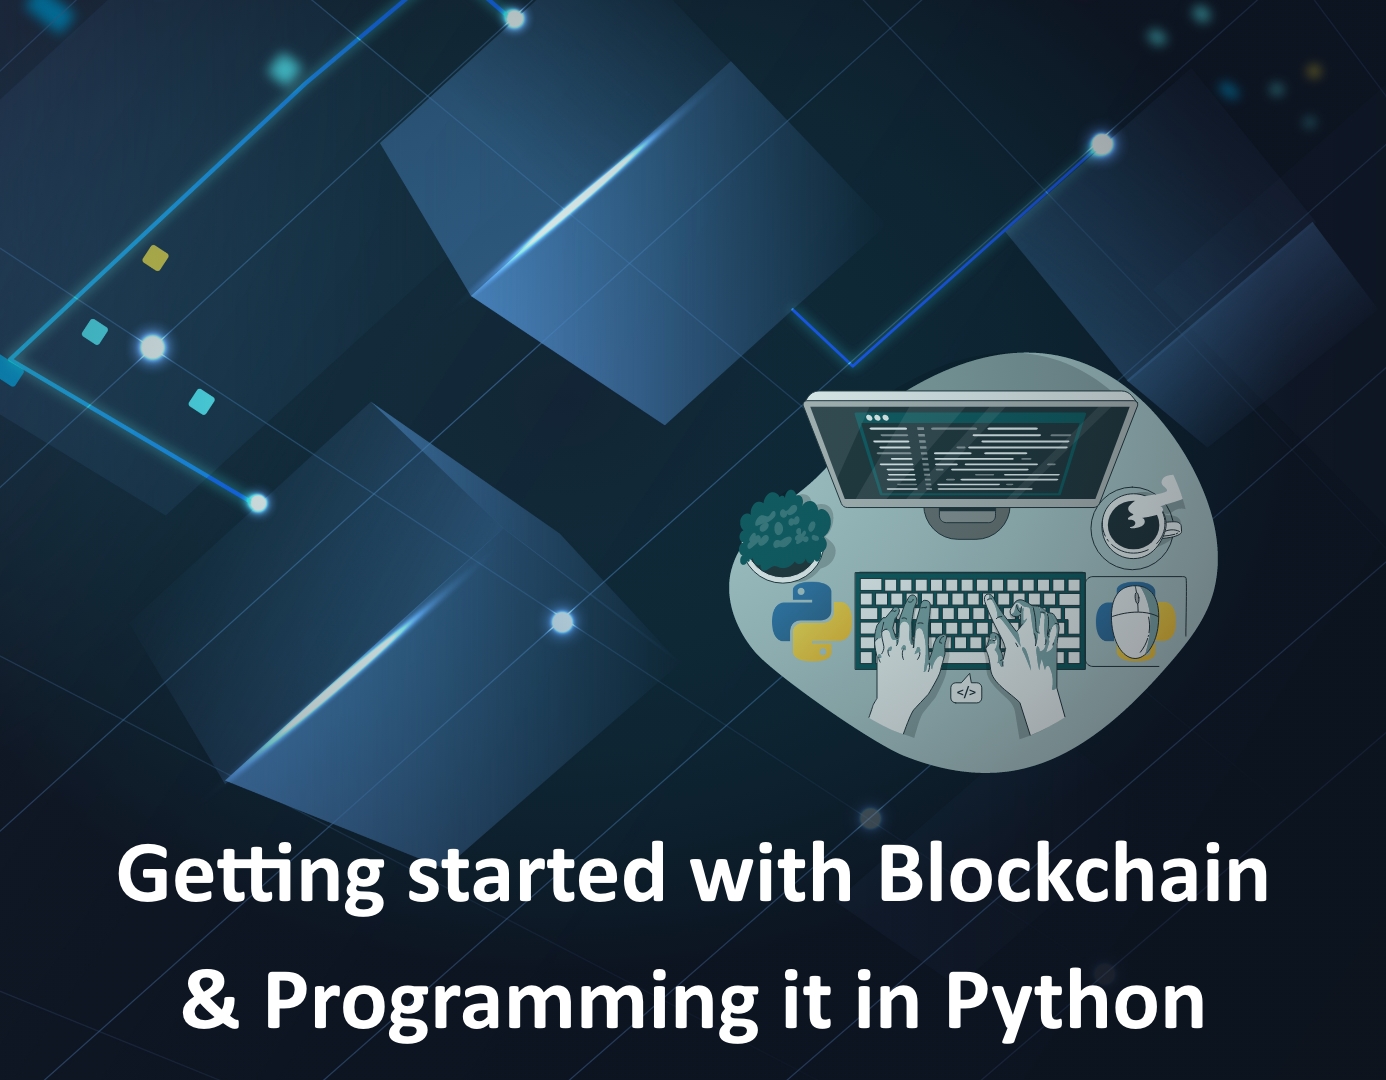 Thumbnail image for a blog post discussing blockchain technology, its core concepts, and how to program it using Python.